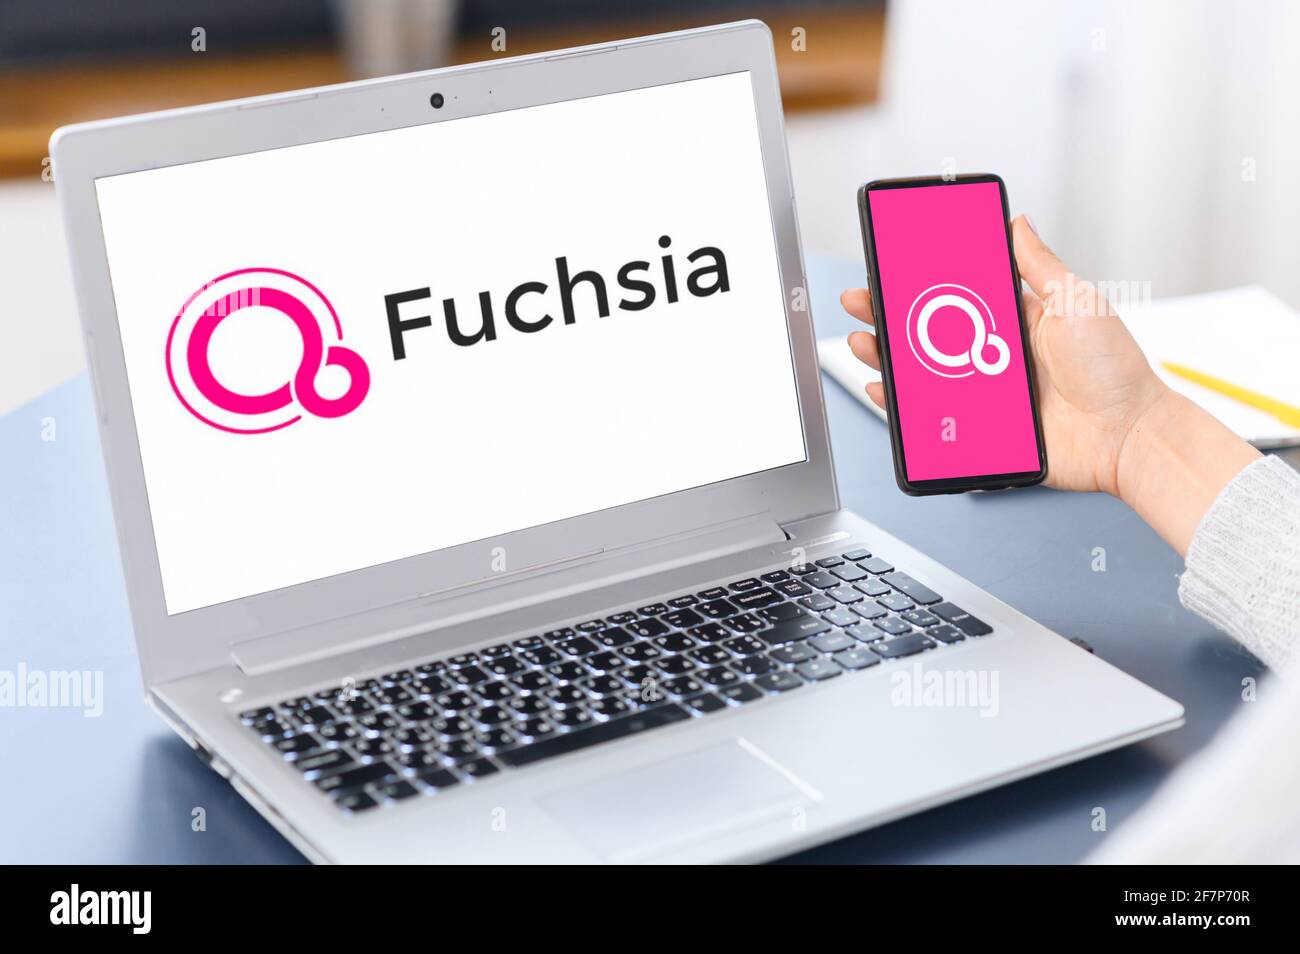 Kyiv, Ukraine - April 2, 2021: Google Fuchsia OS logos on the mobile phone screen and on the laptop display, operating system developed by Google Corporation Stock Photo